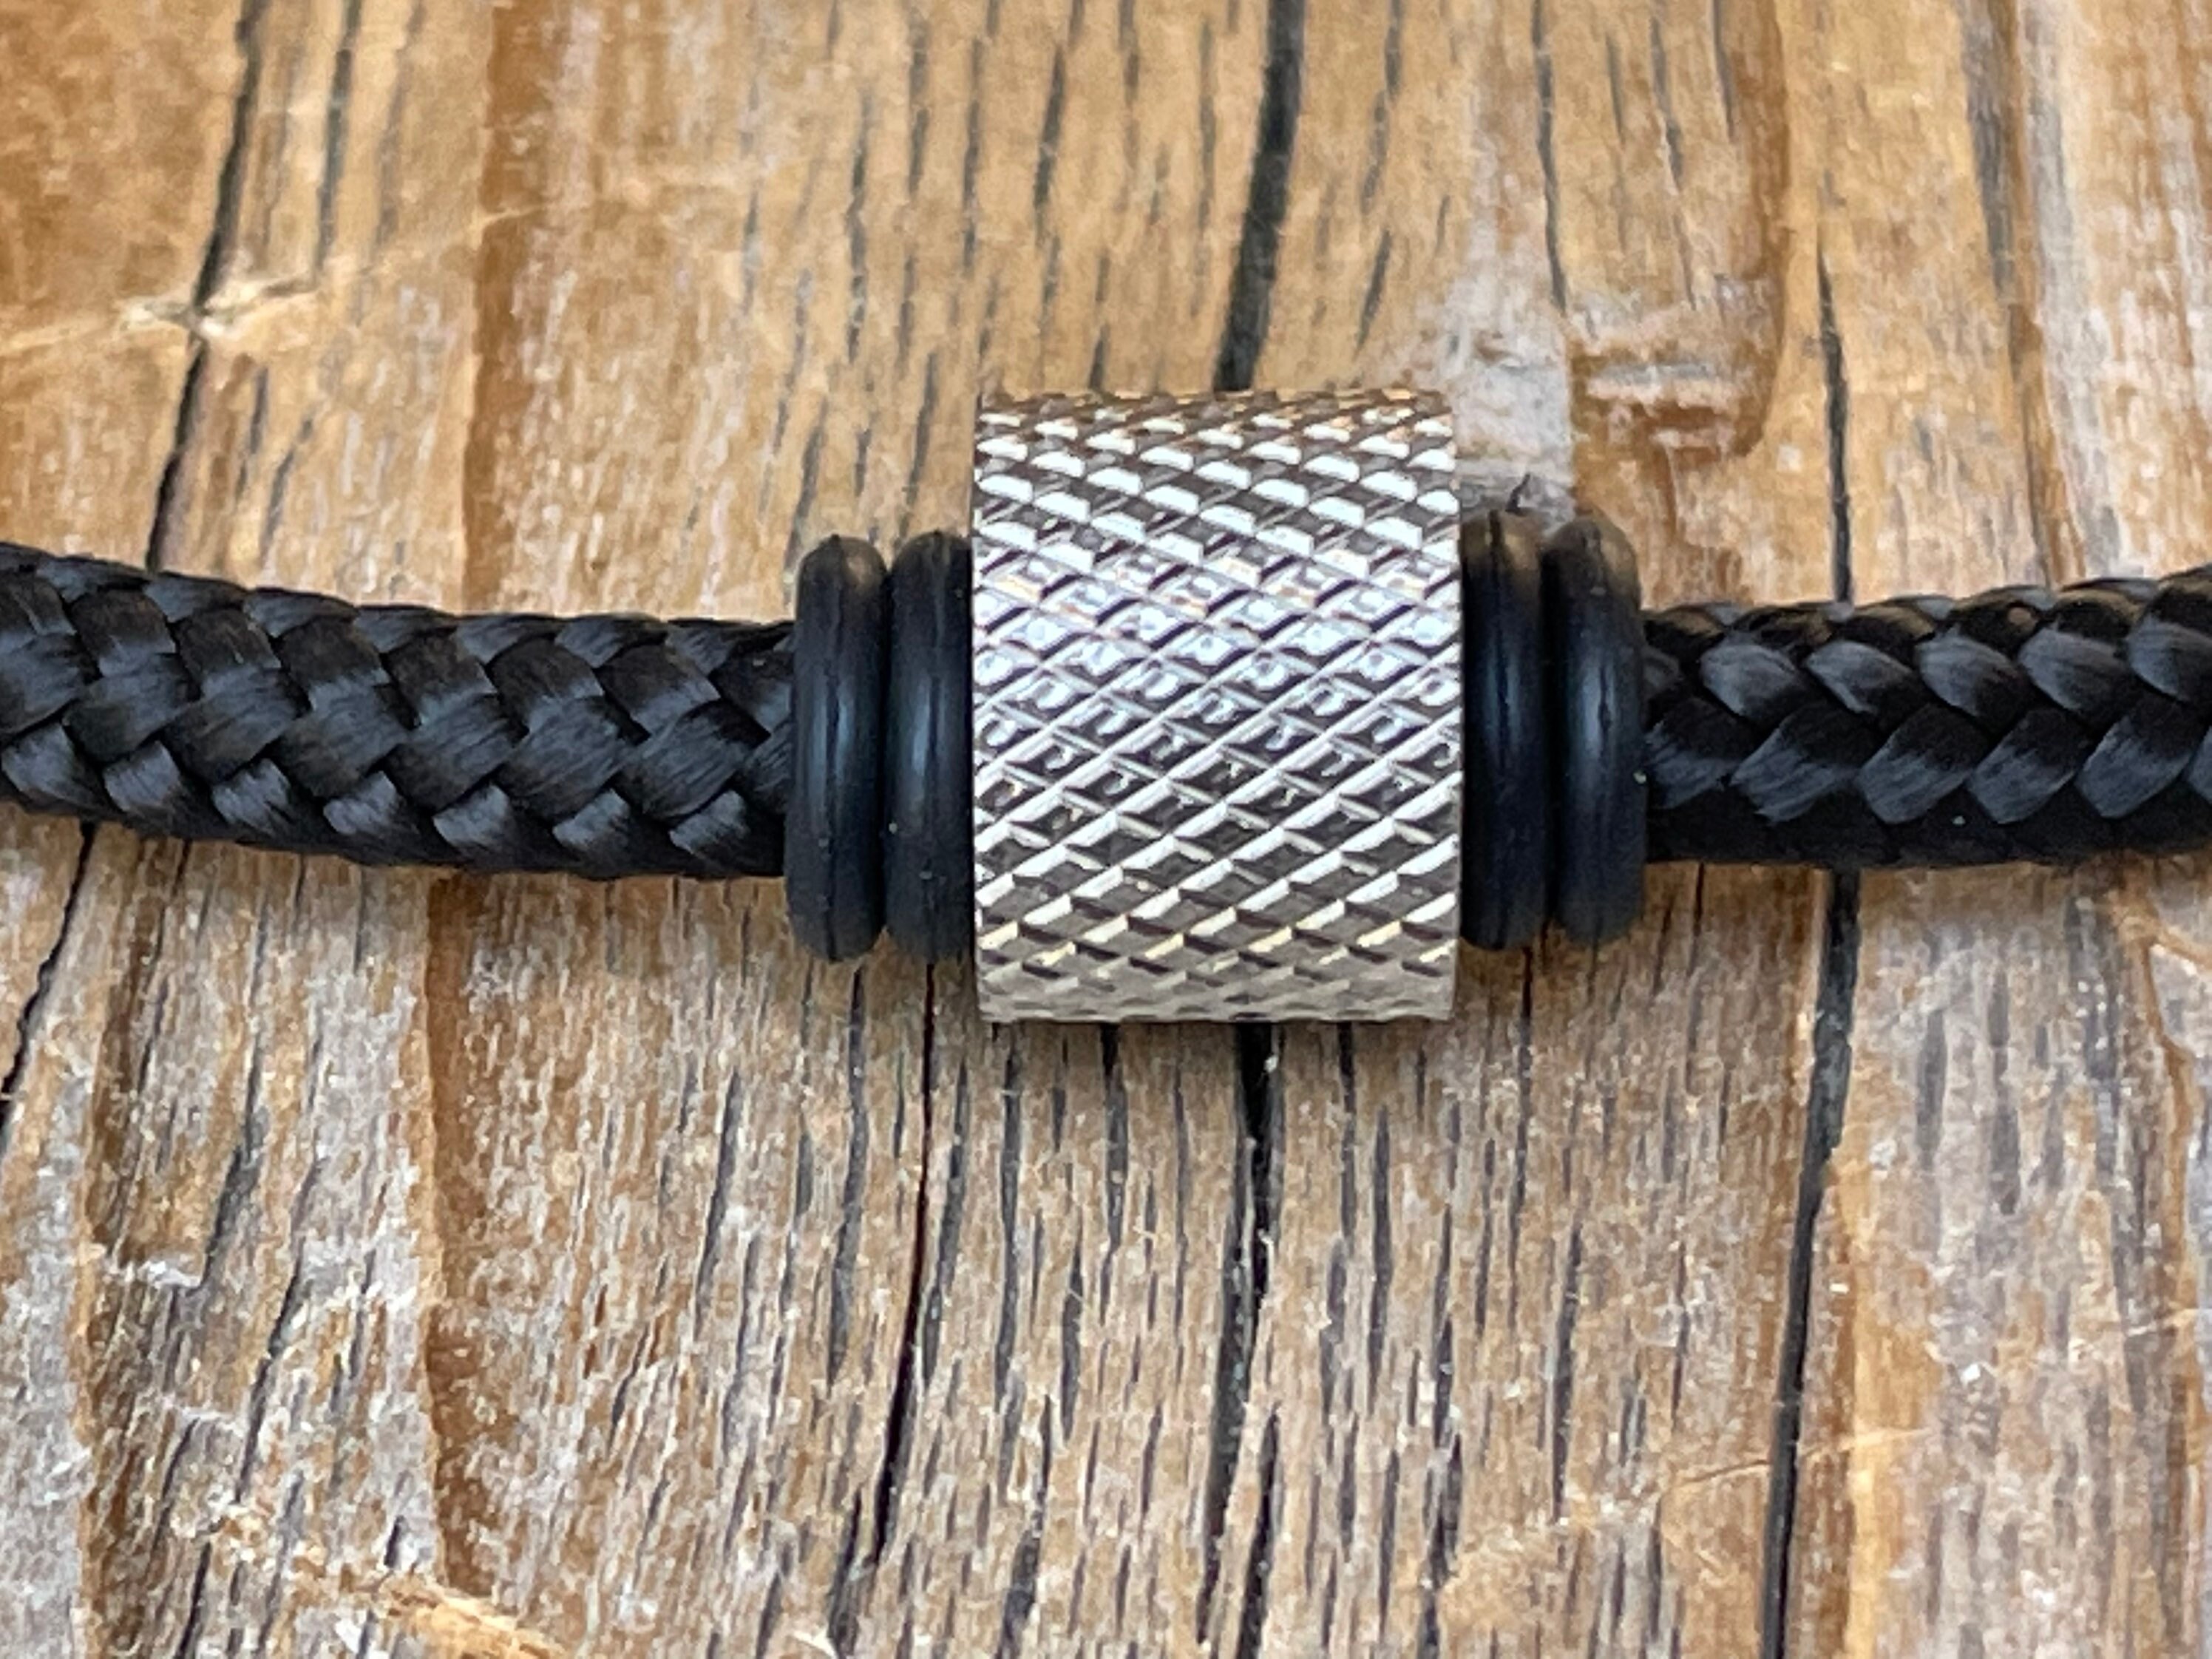 Mens necklace. Paracord necklace with beads. Mens Choker. Mjolnir neck –  KNOT-finds